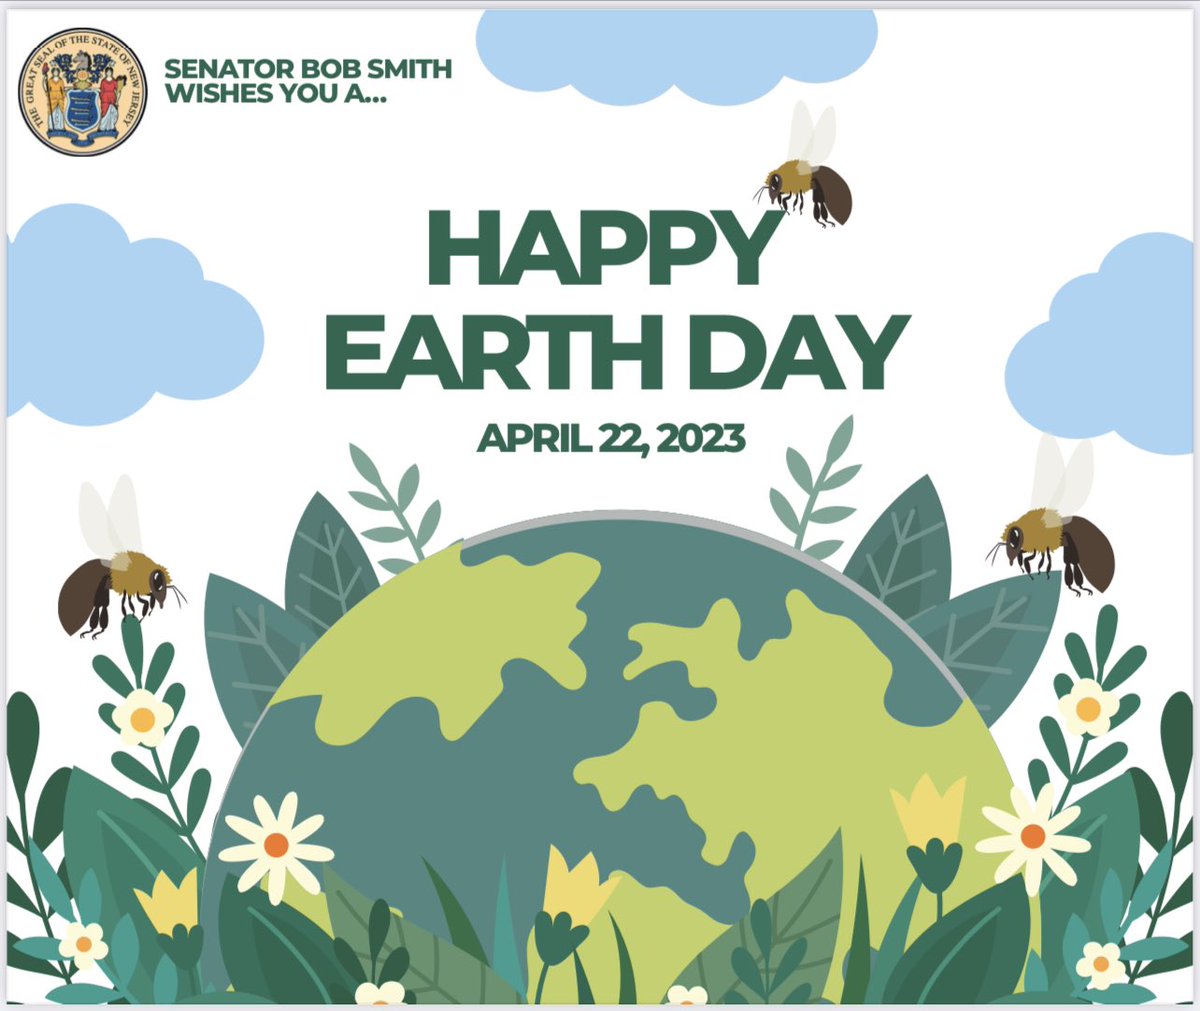 Happy #EarthDay2023 We have made significant progress protecting our planet yet we have more work to do! Let’s all work together! We are not alone in this fight, the health of our planet is the health of us all. Unity is key!